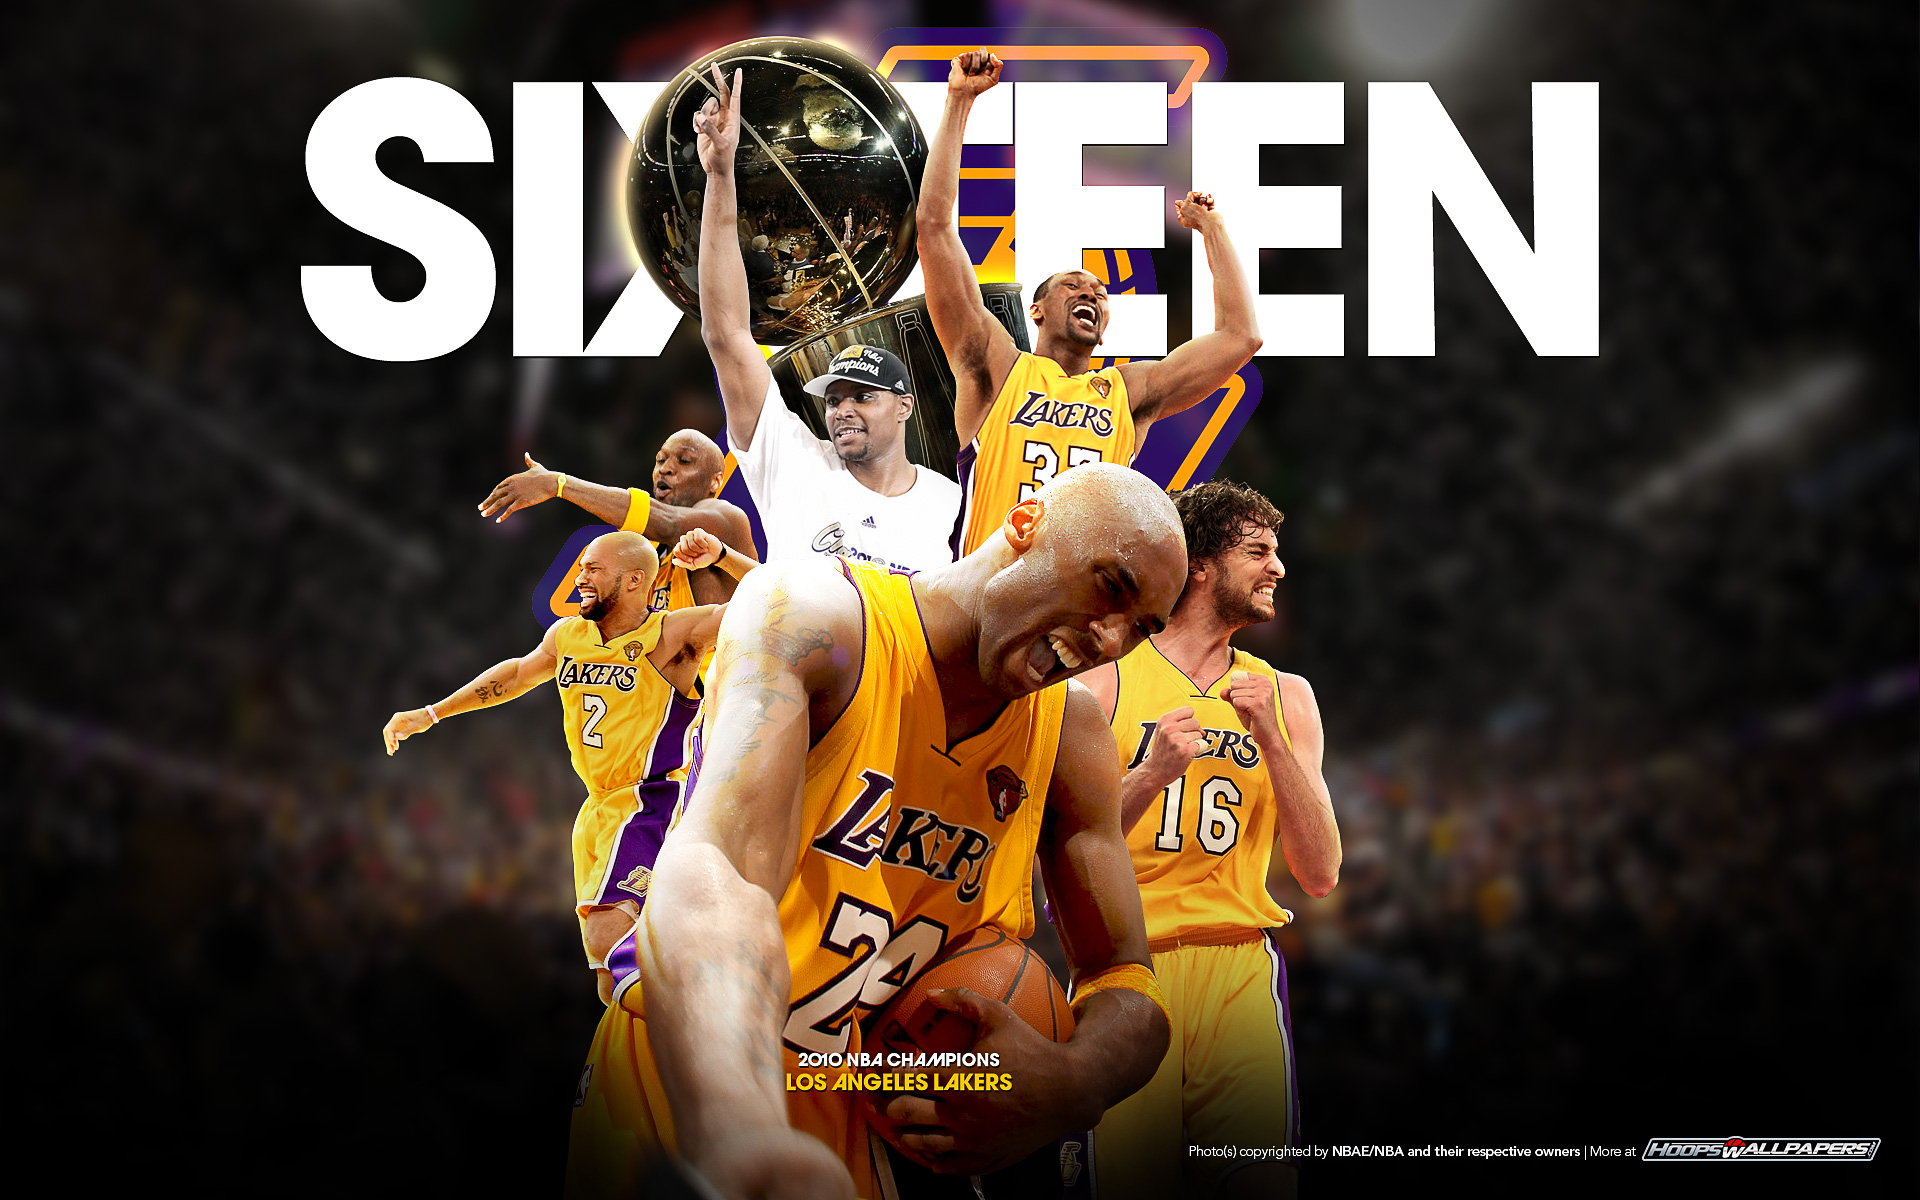 HoopsWallpapers.com – Get the latest HD and mobile NBA wallpapers today! » LA Lakers1920 x 1200